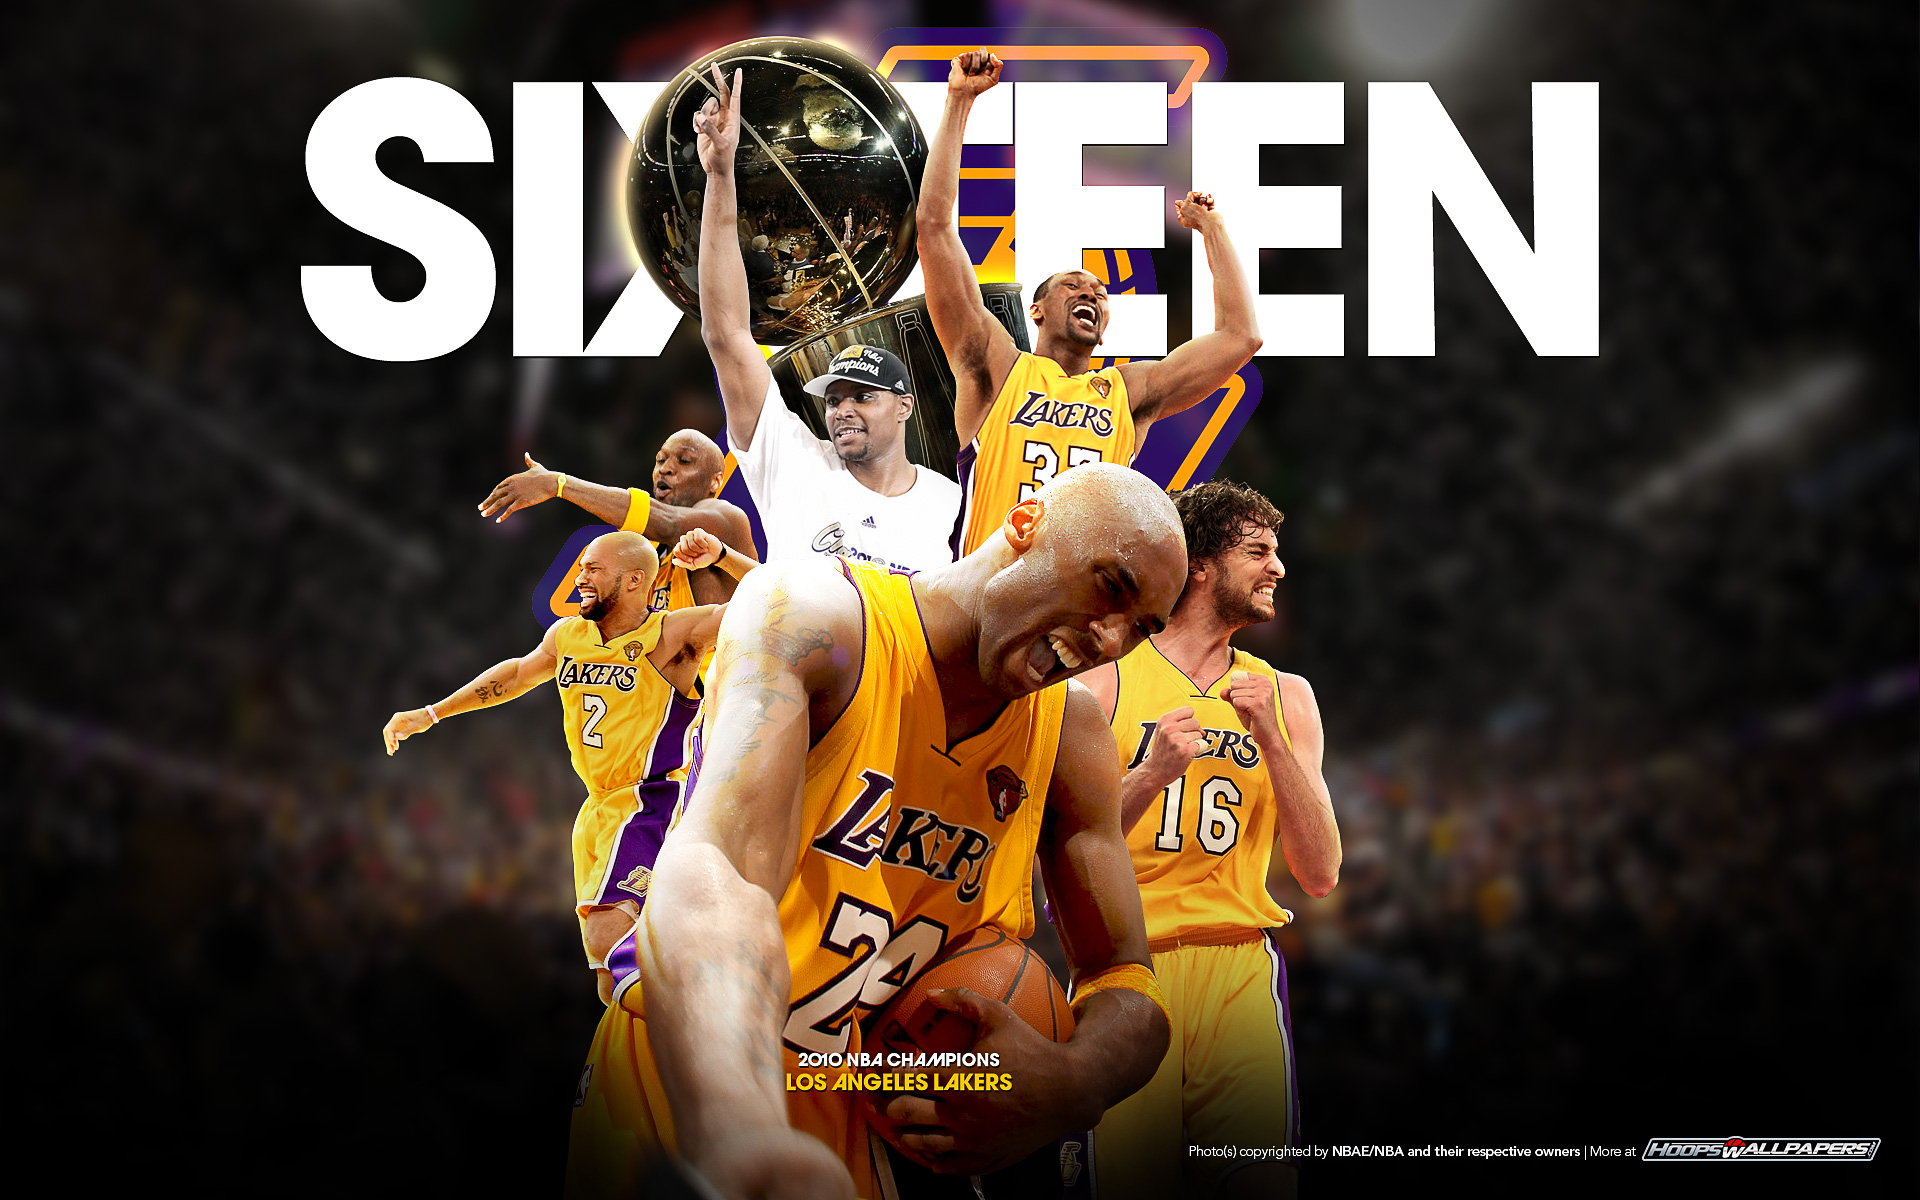 HoopsWallpapers.com – Get the latest HD and mobile NBA wallpapers today! » LA Lakers1920 x 1200